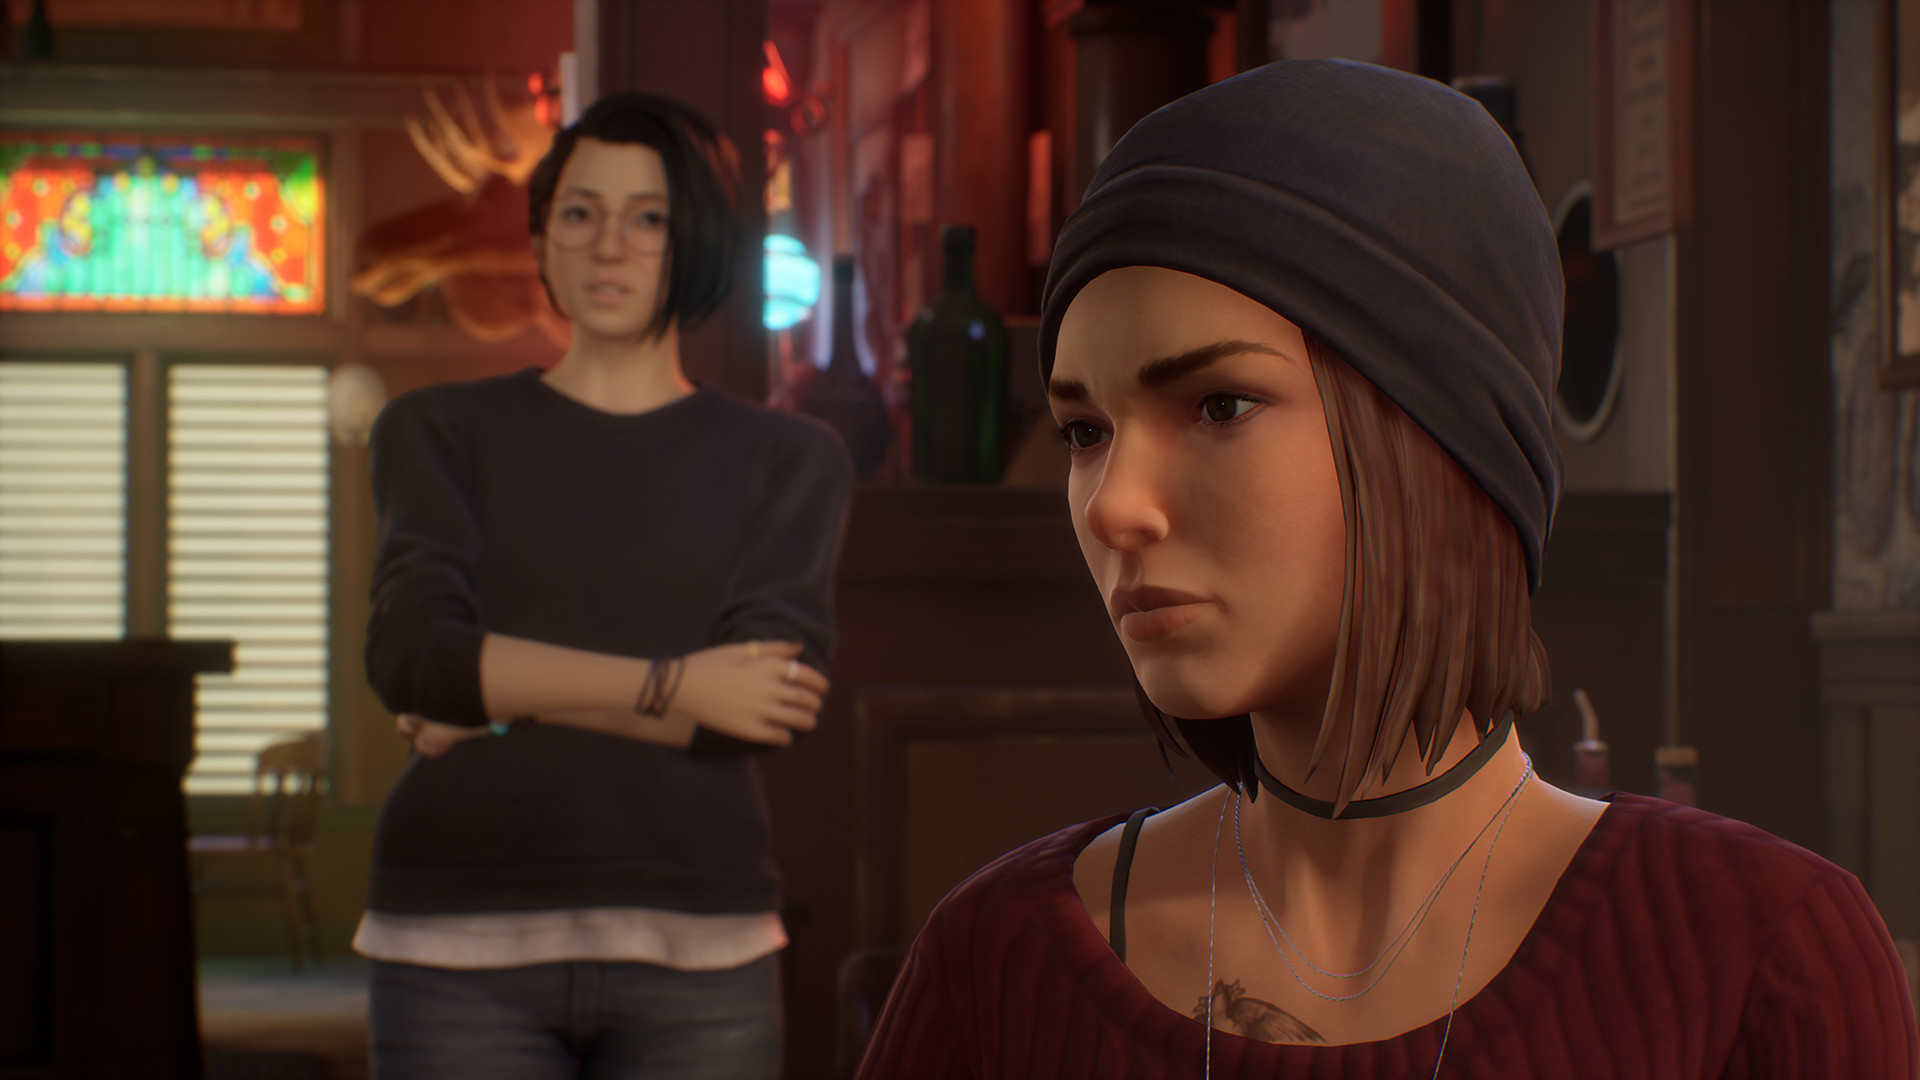 Life is Strange: True Colors review — A story I won't forget